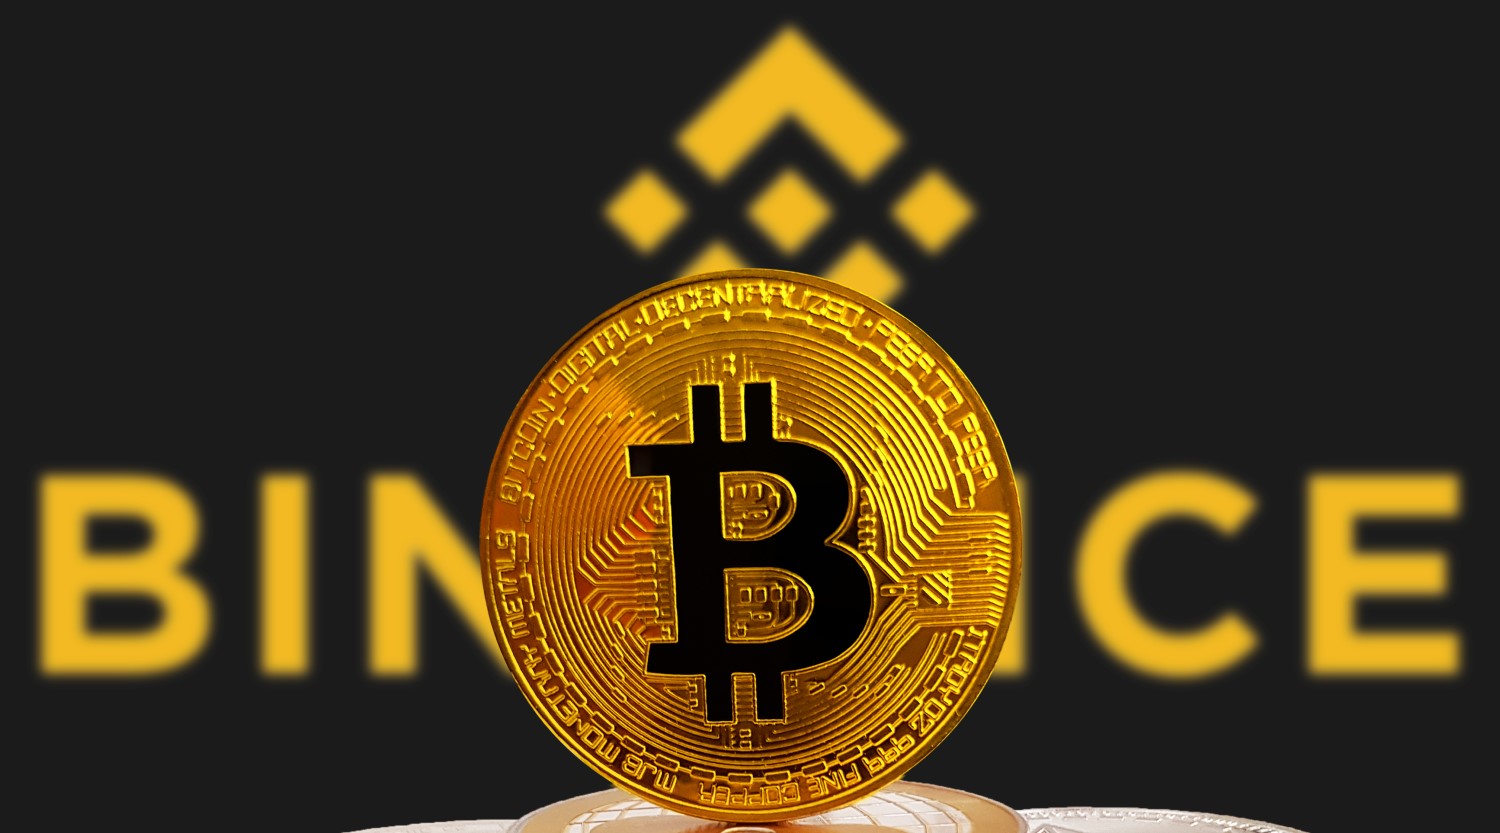 Picture of a bitcoin in front of the binance logo with binance written behind it